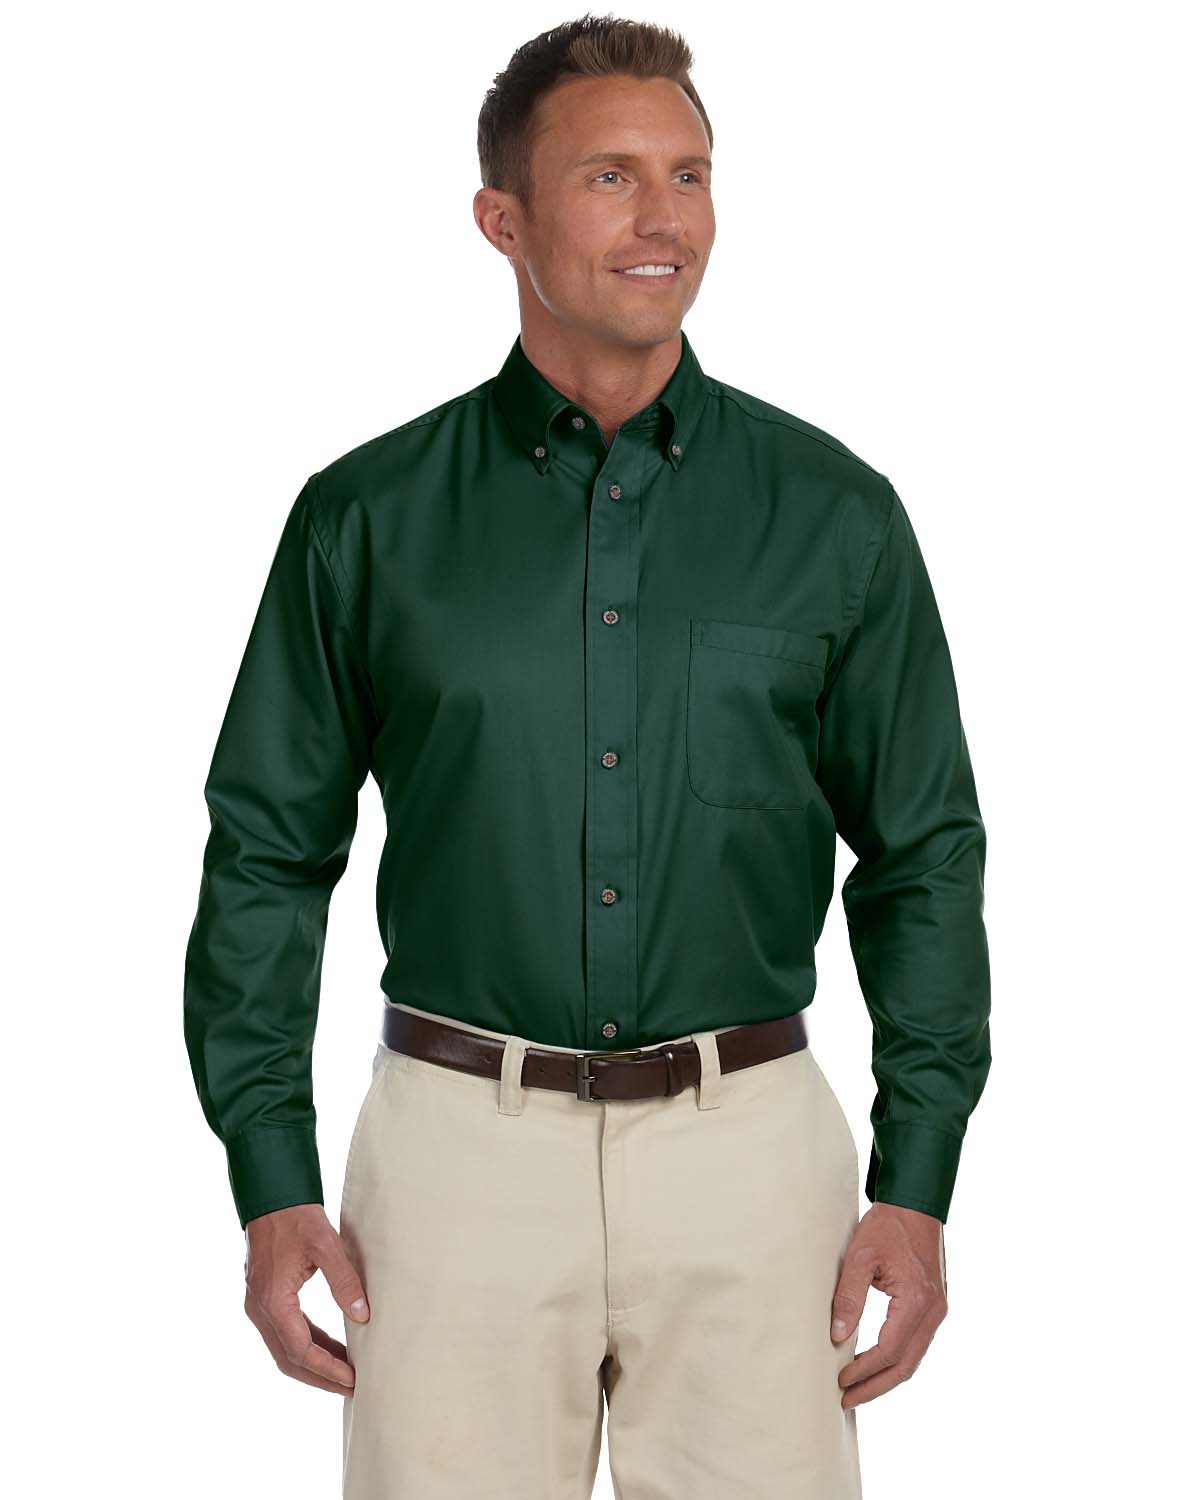 Harriton Men's Long-Sleeve Twill Shirt with Stain Release